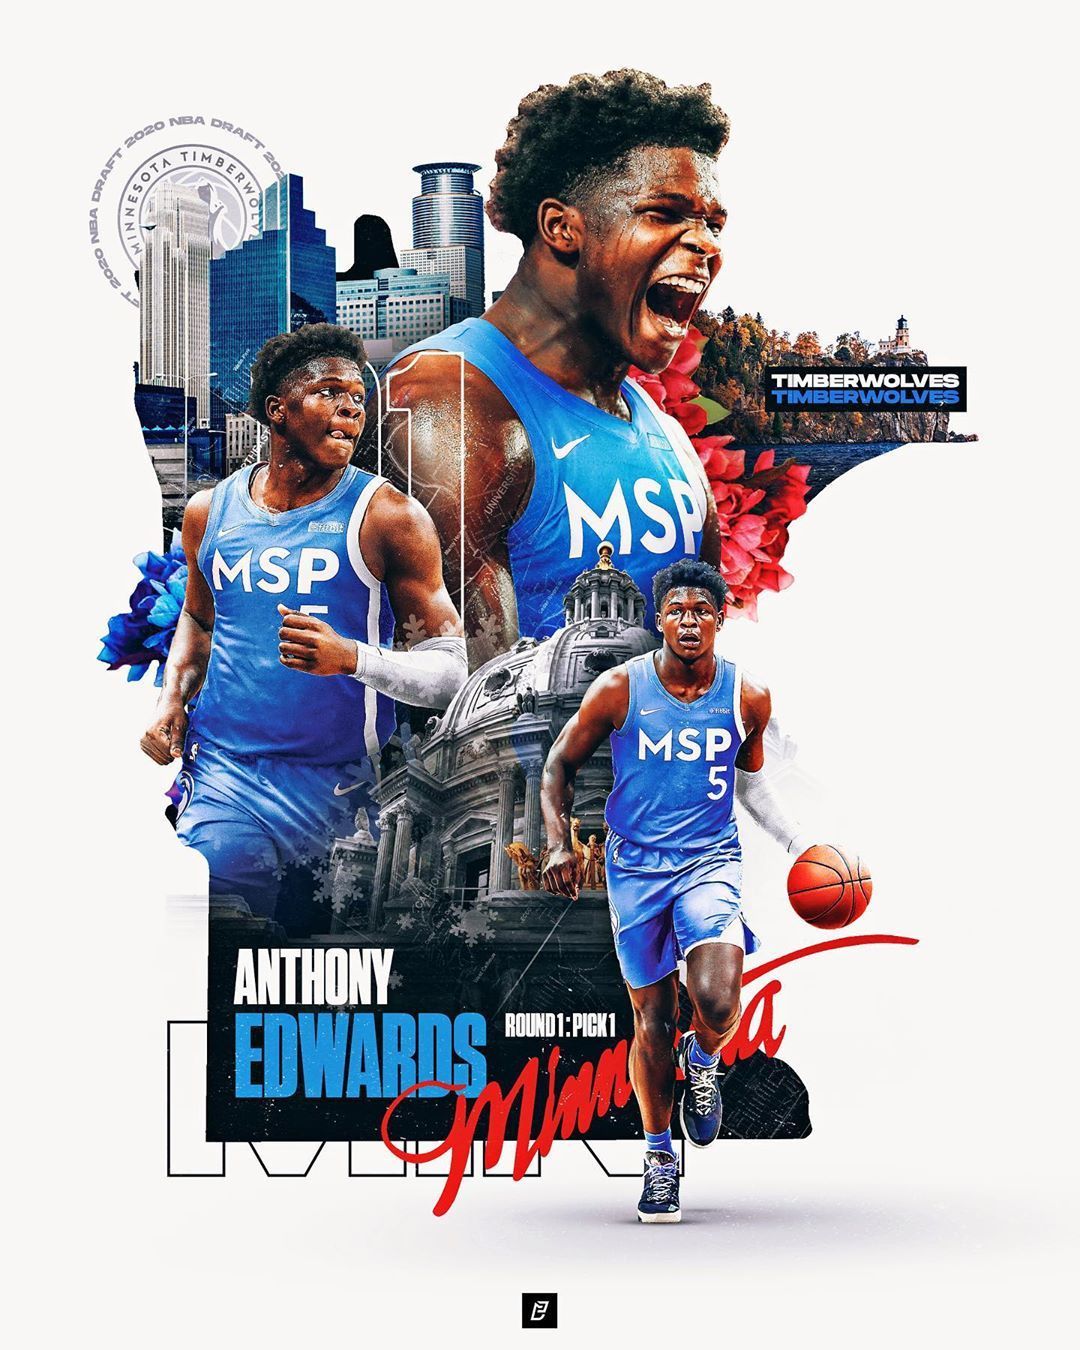 Enrique Castellano on Instagram: “With the first pick in the 2020 NBA Draft, the Minnesota. Sports design ideas, Sports design inspiration, Sports graphic design